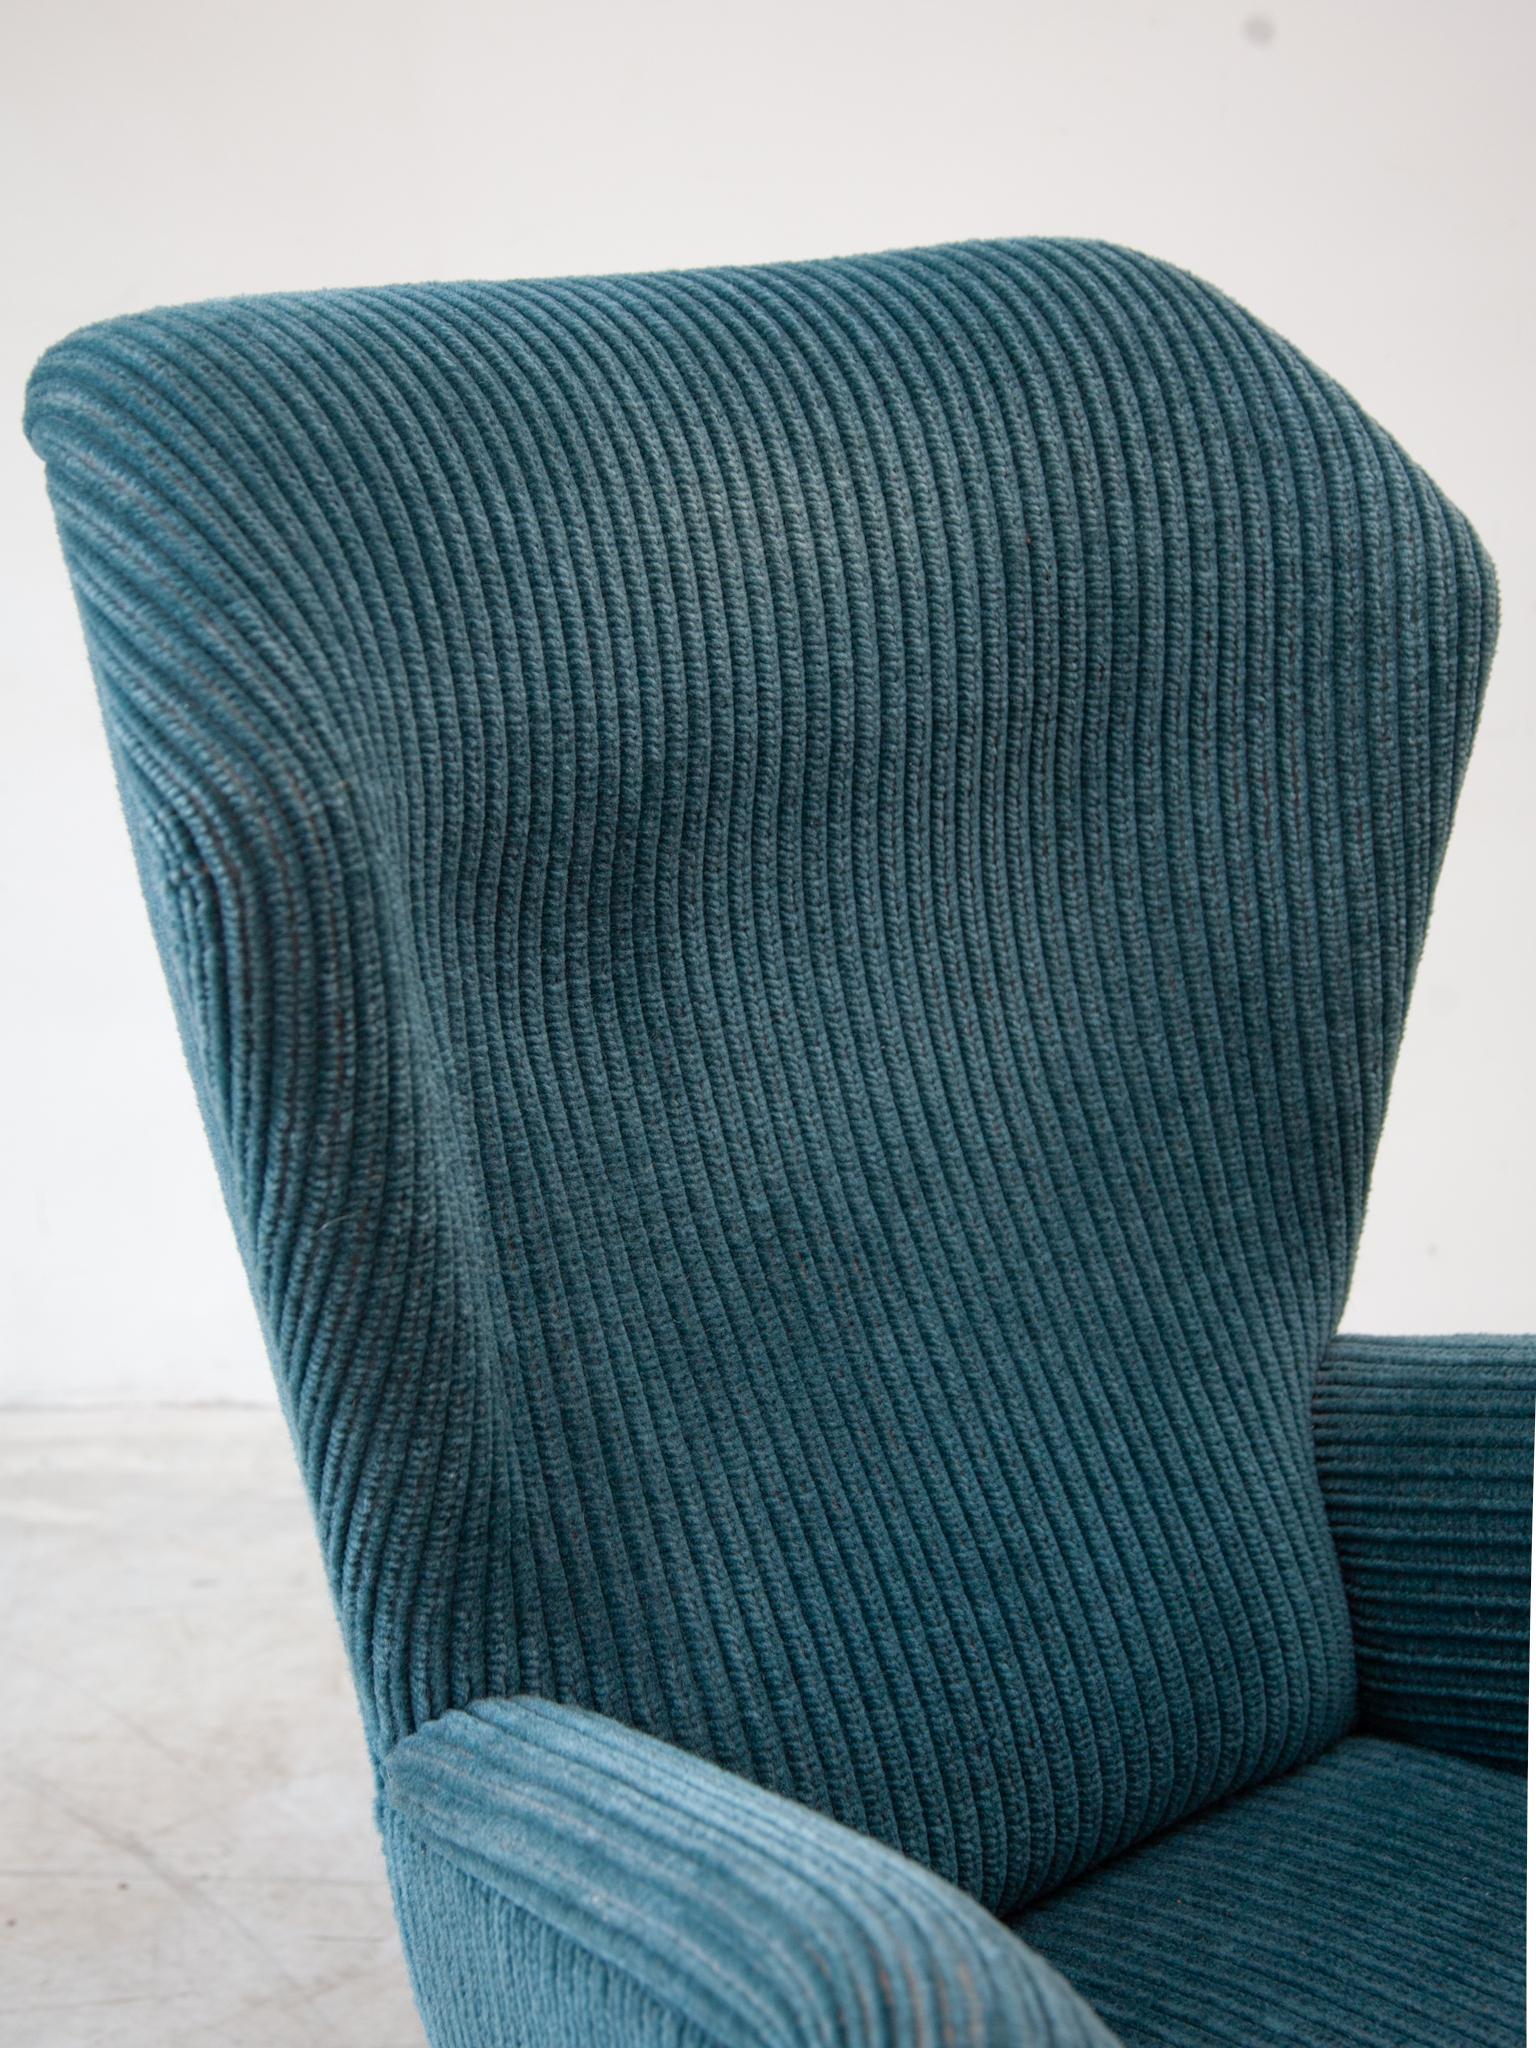 Mid-20th Century High Wingback Lounge Chair, Germany designed by Ernst Jahn, 1950s For Sale